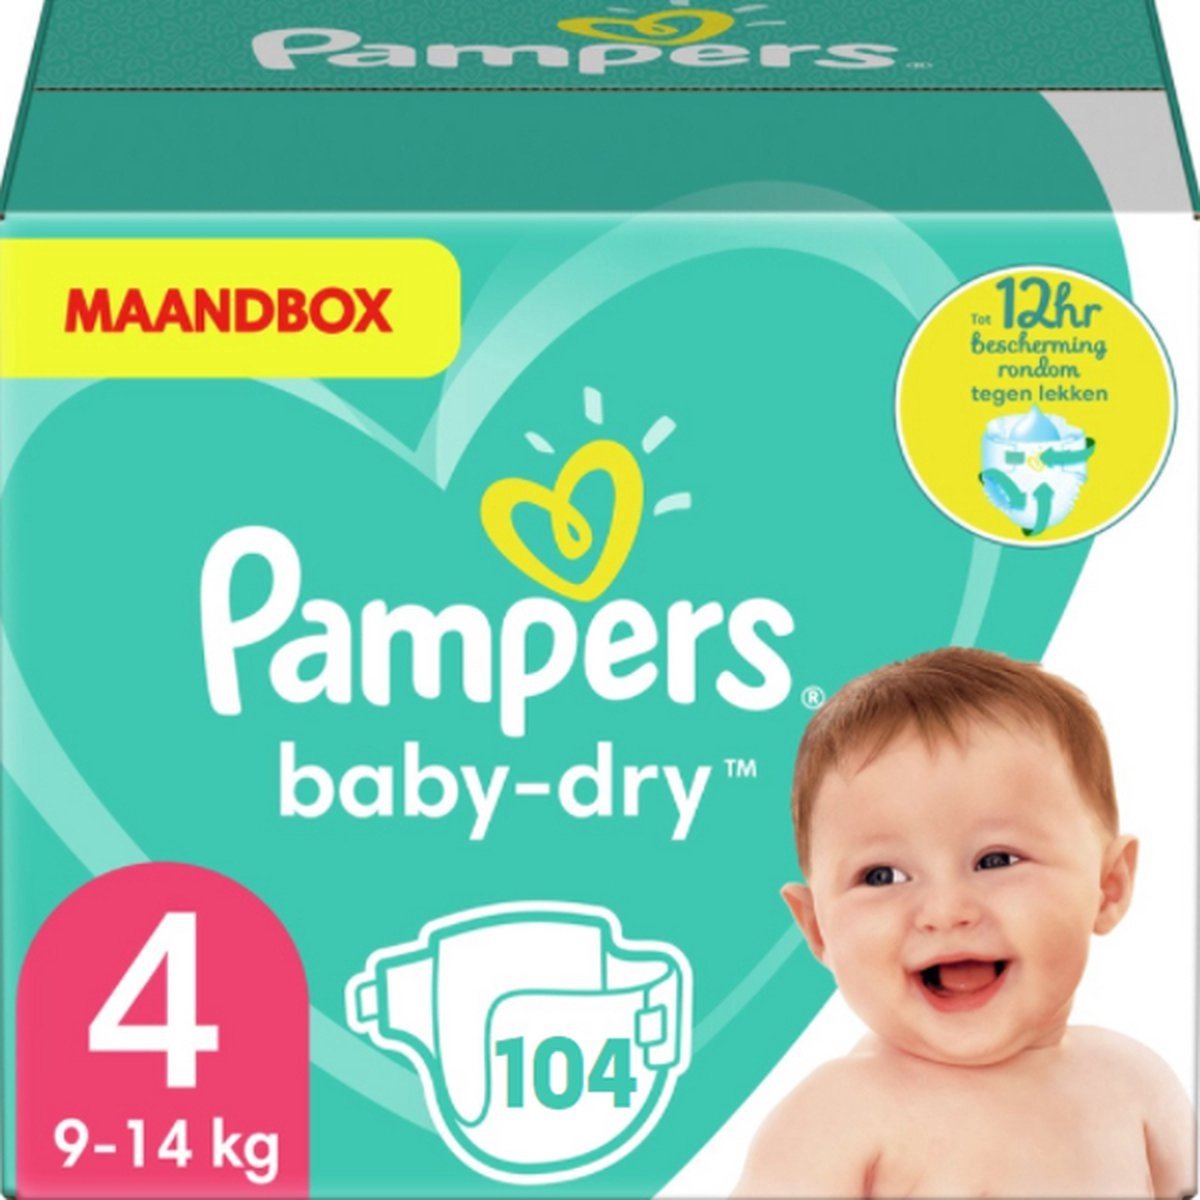 Pampers Baby-Dry Pants Maxi taille 4, 9-15 kg 42 pièces